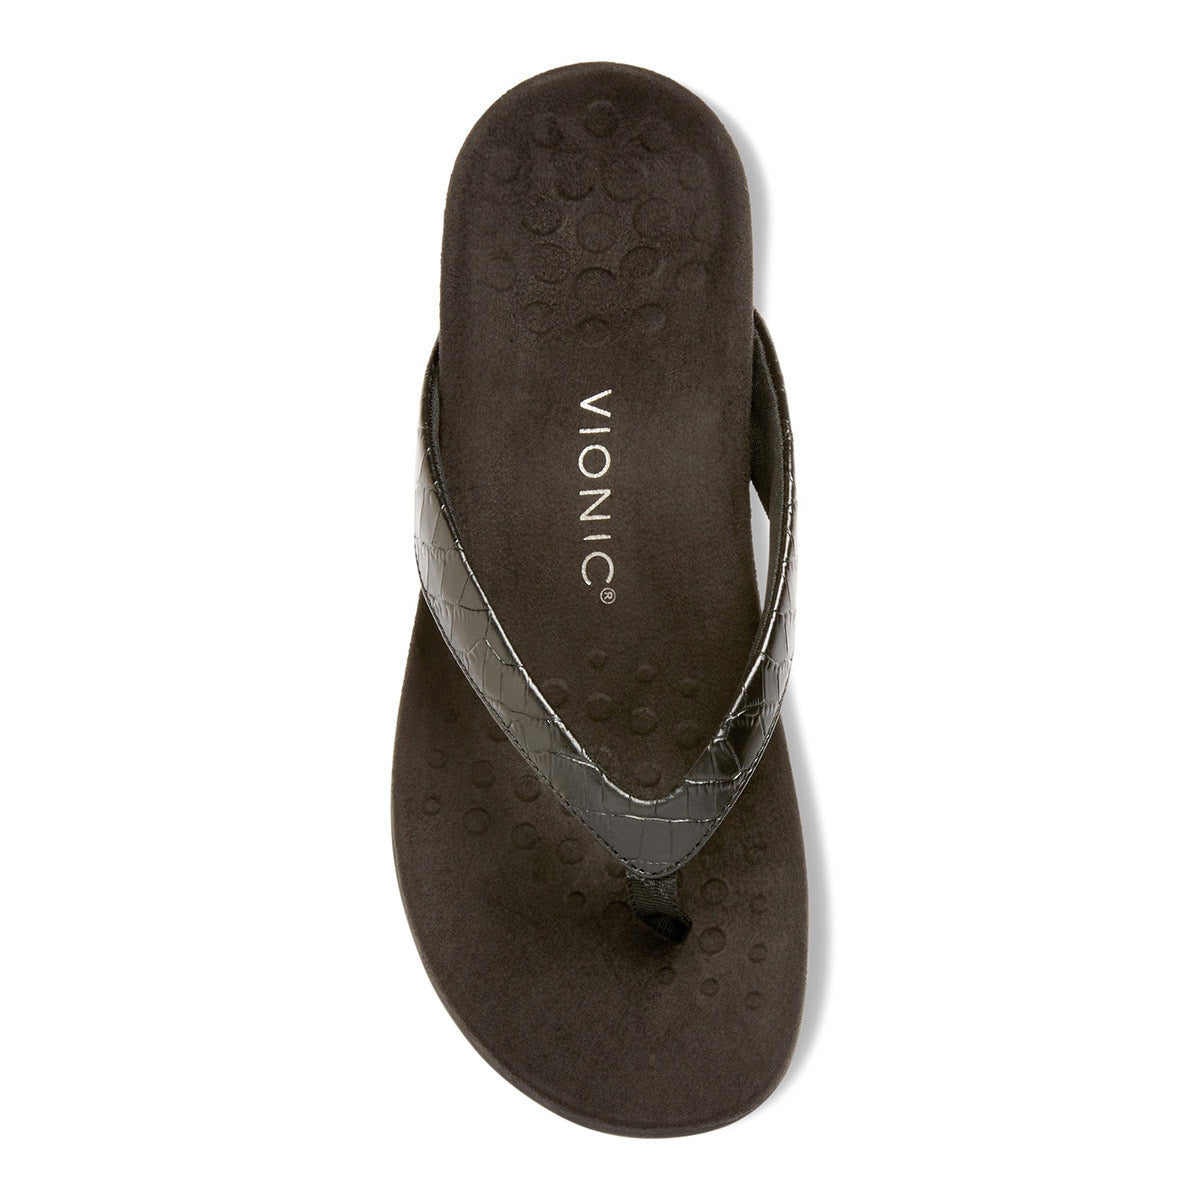 A single VIONIC DILLON BLACK CROCO sandal with a dark sole and crisscrossed straps, featuring an orthotic footbed, photographed from above on a white background.